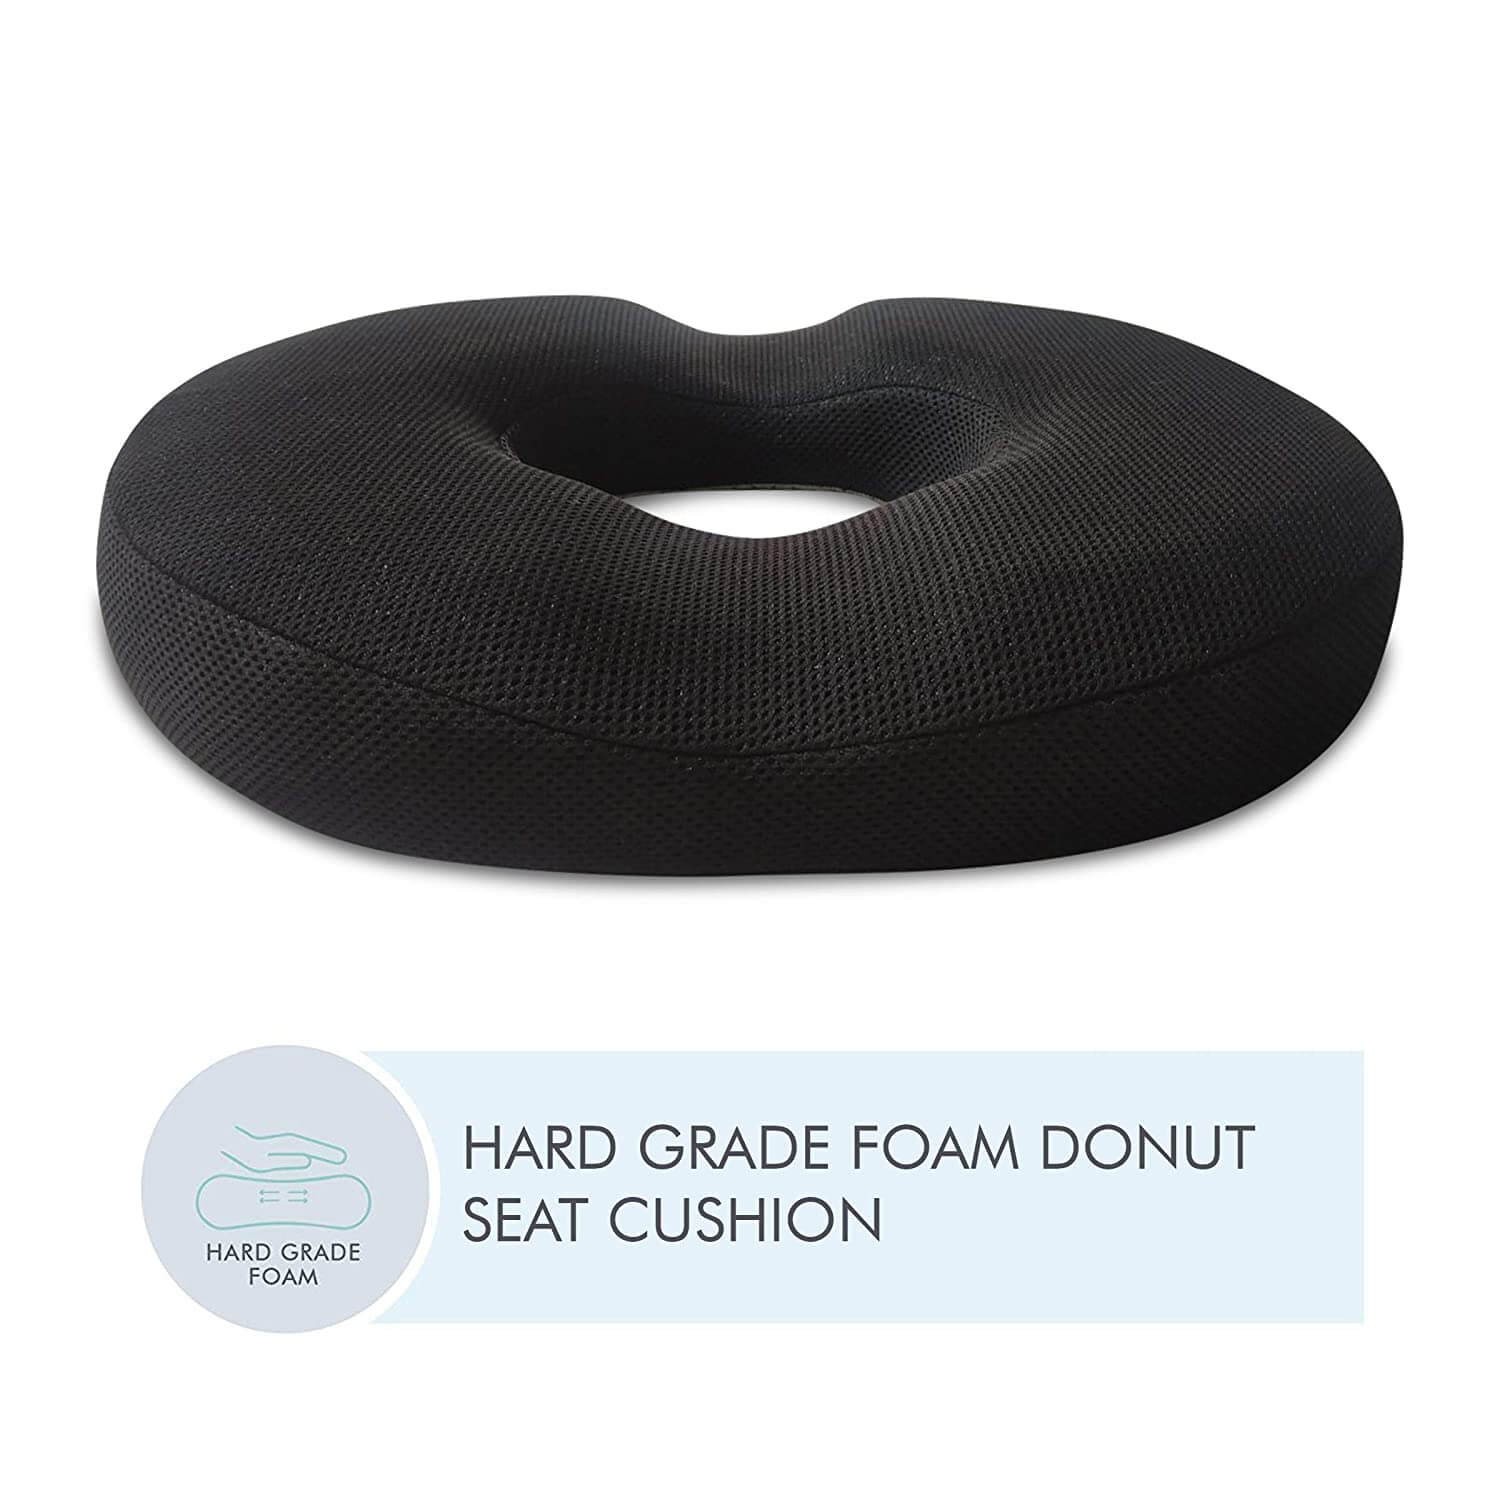 https://www.meddey.com/uploads/images/product_images/coccyx-cushion/1594879360_donut-pillow_hemmorroid_pile_image_1.jpg